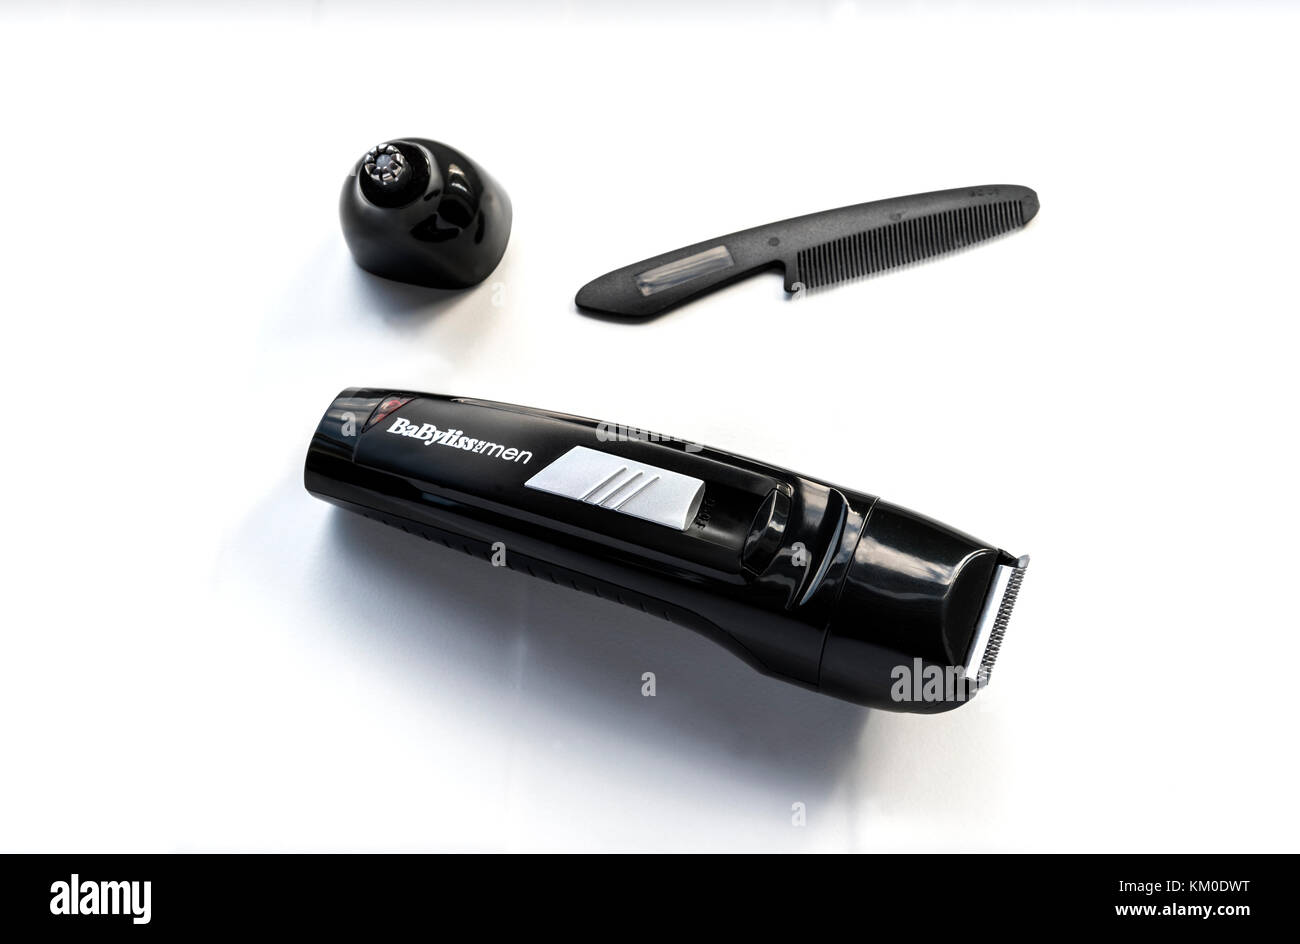 Babyliss men beard and body trimmer, personal grooming. Stock Photo